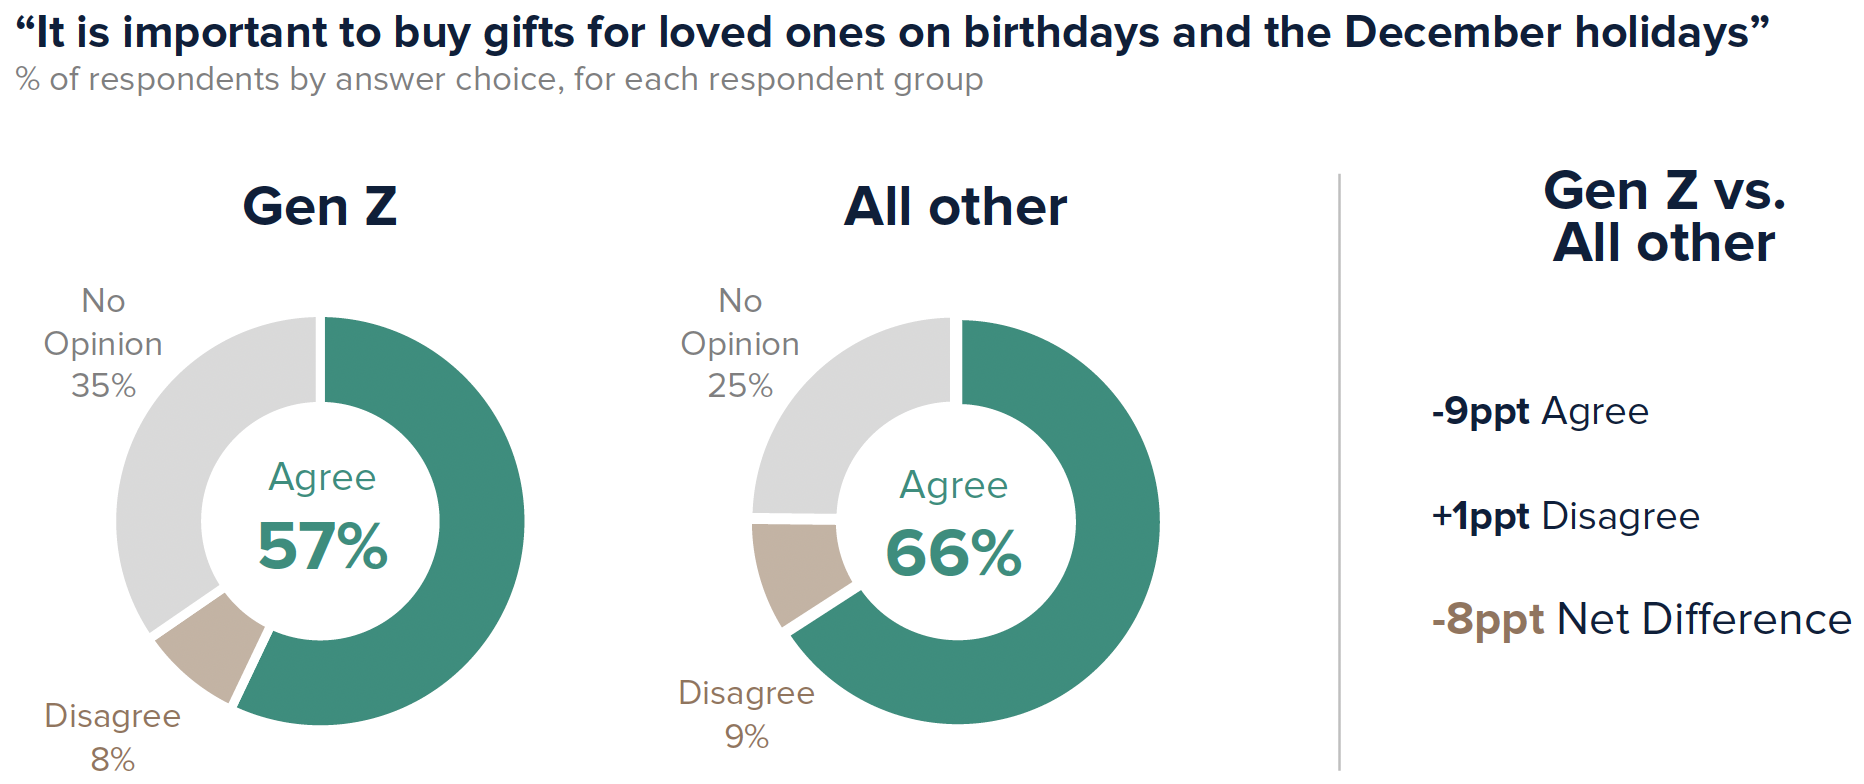 57% of Gen Z agrees “it is important to buy gifts for loved ones on birthdays and the December holidays”